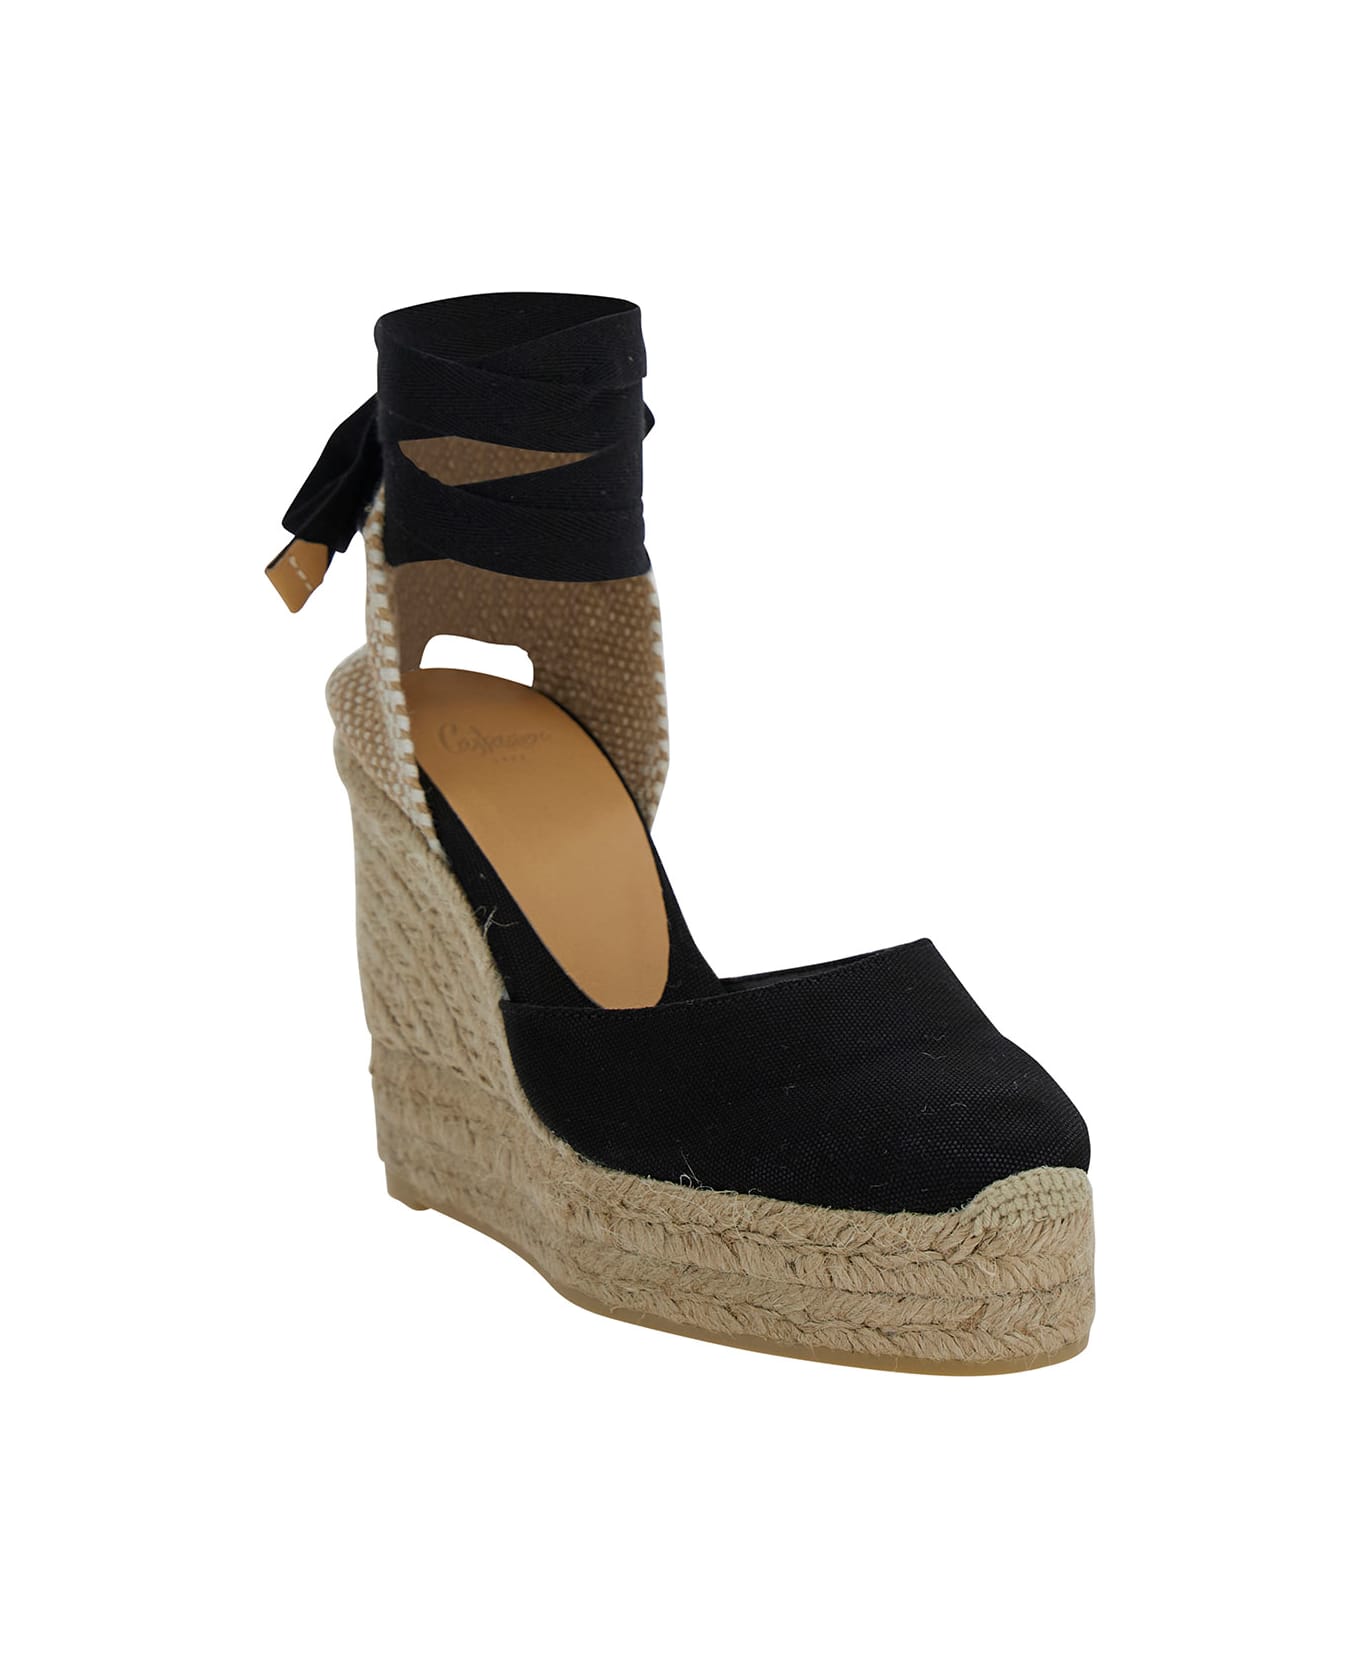 Castañer 'carina' Beige And Black Espadrille Wedge In Cotton And Rafia Woman - Black ウェッジシューズ